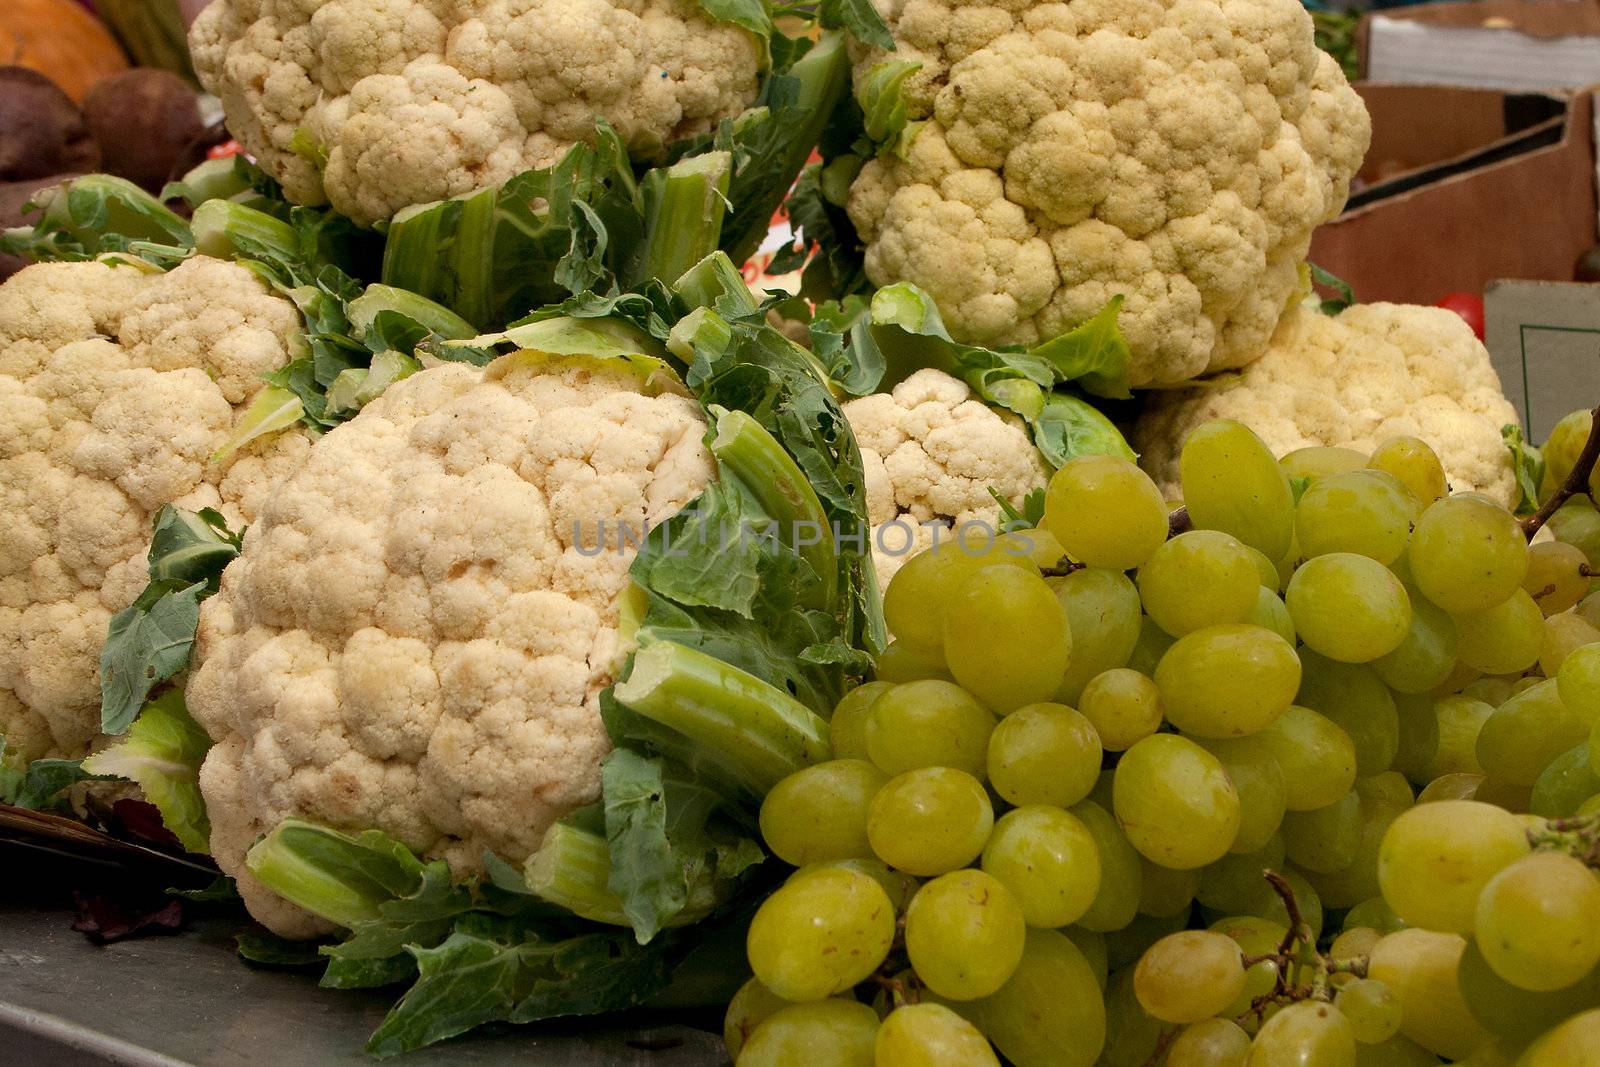 Cauliflower and Grapes at the local market